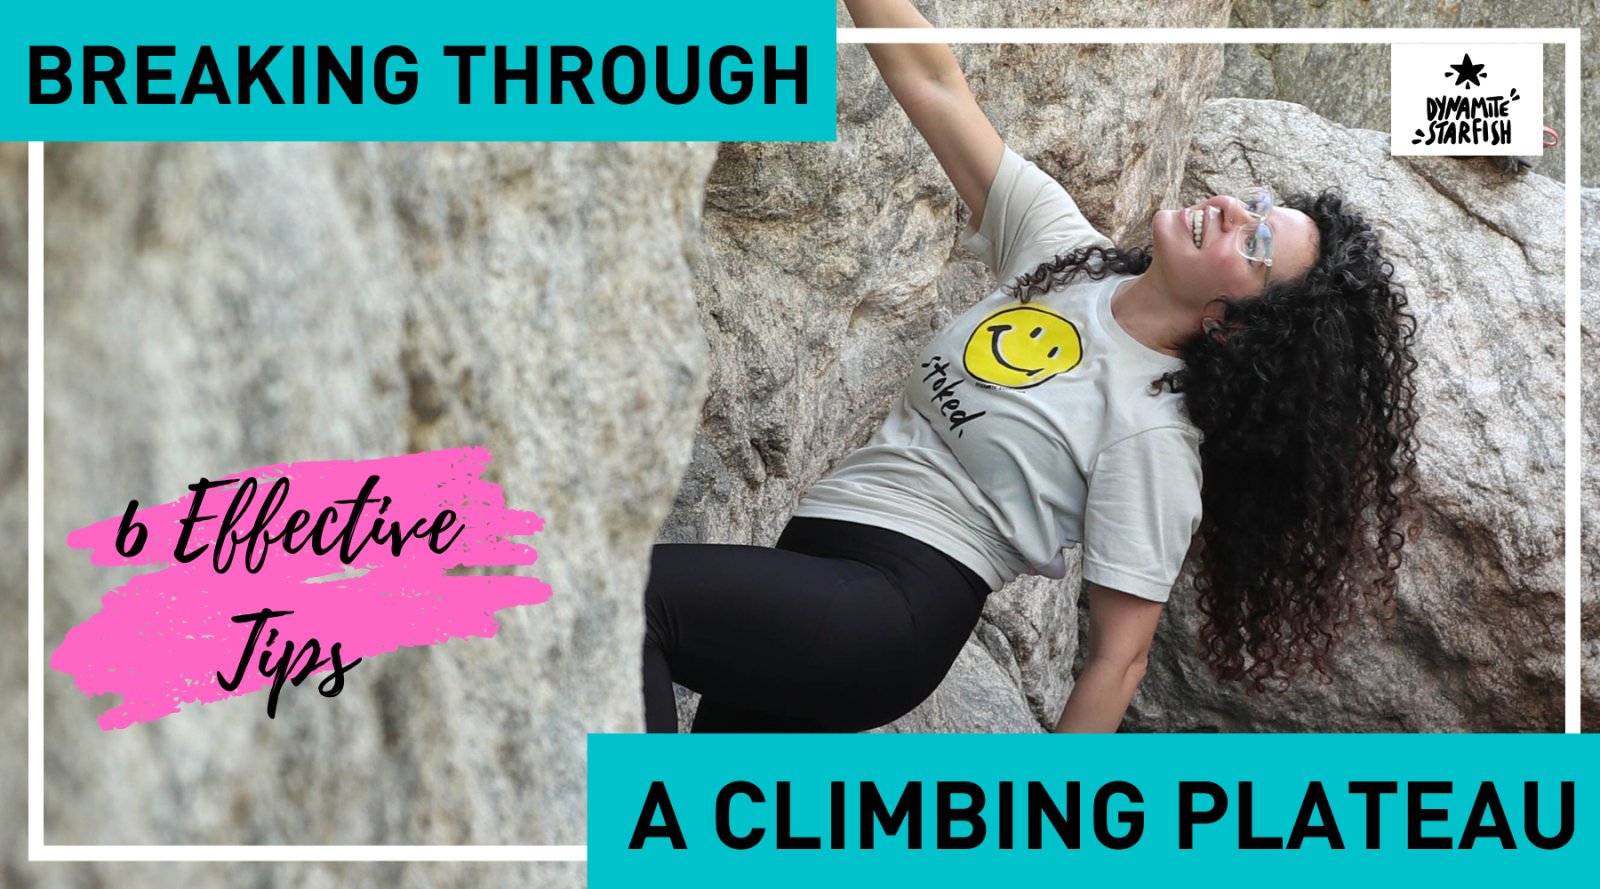 The Most Effective Ways To Break Through A Plateau In Rock Climbing - Dynamite Starfish